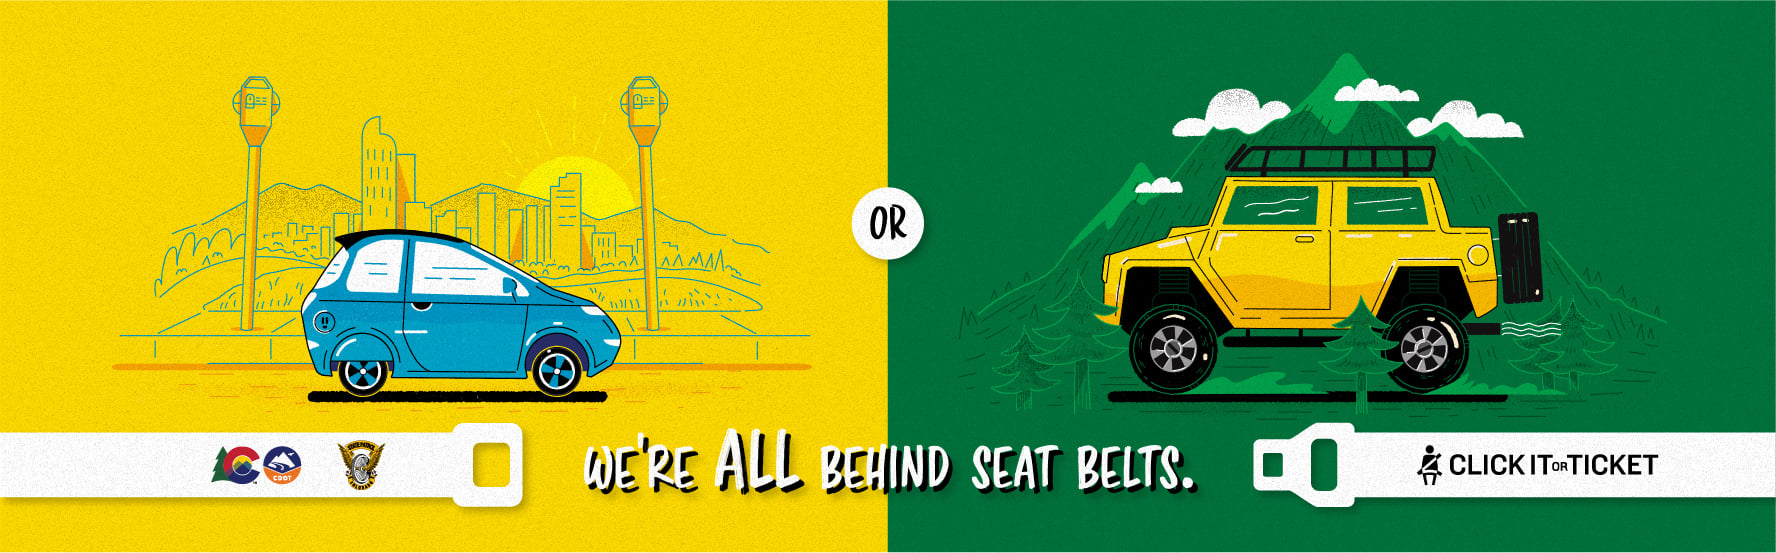 Vehicles, we're all behind seat belts, city, mountains, SUV, electric vehicle 